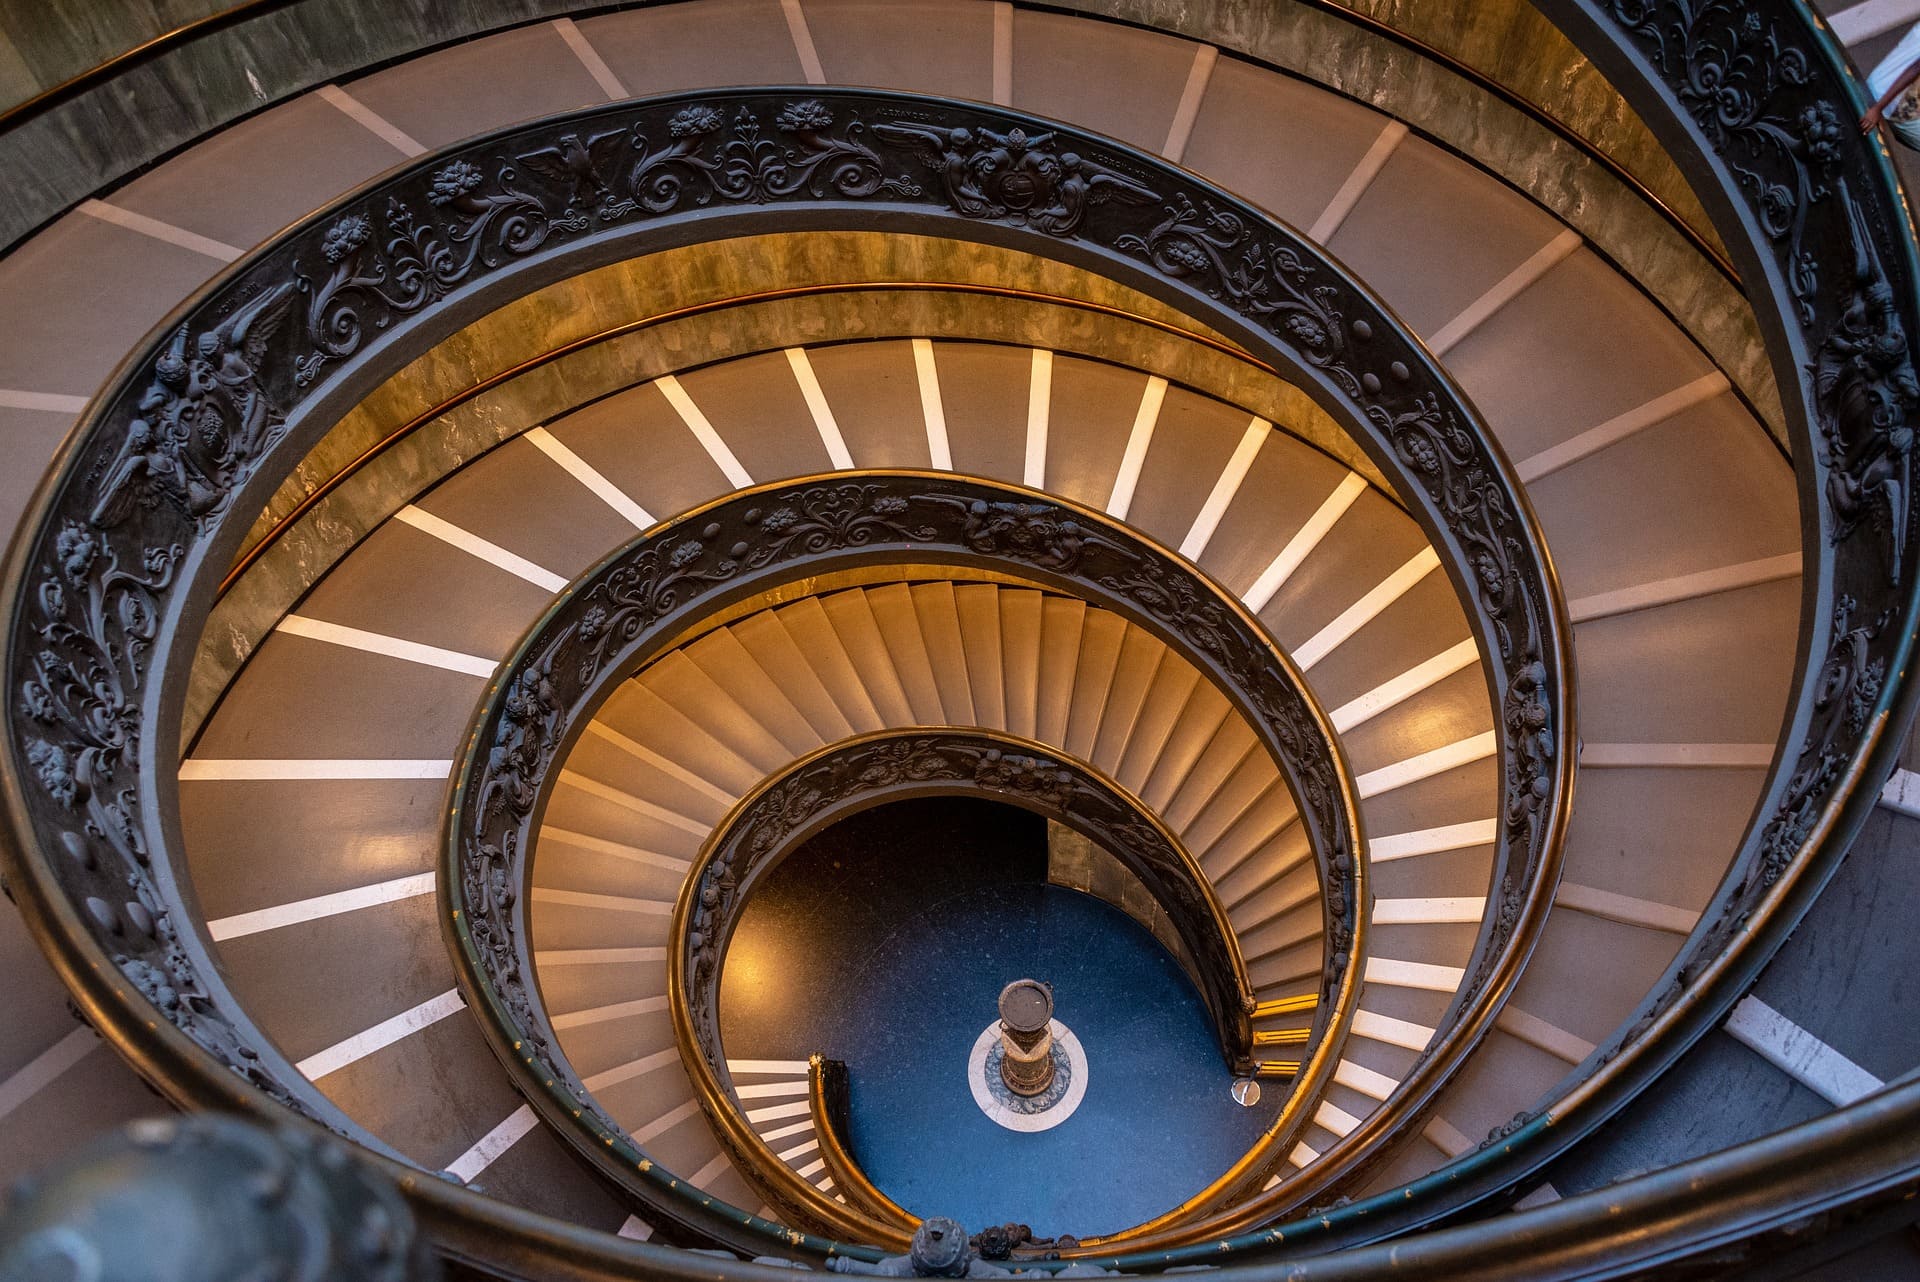 The Vatican Museums